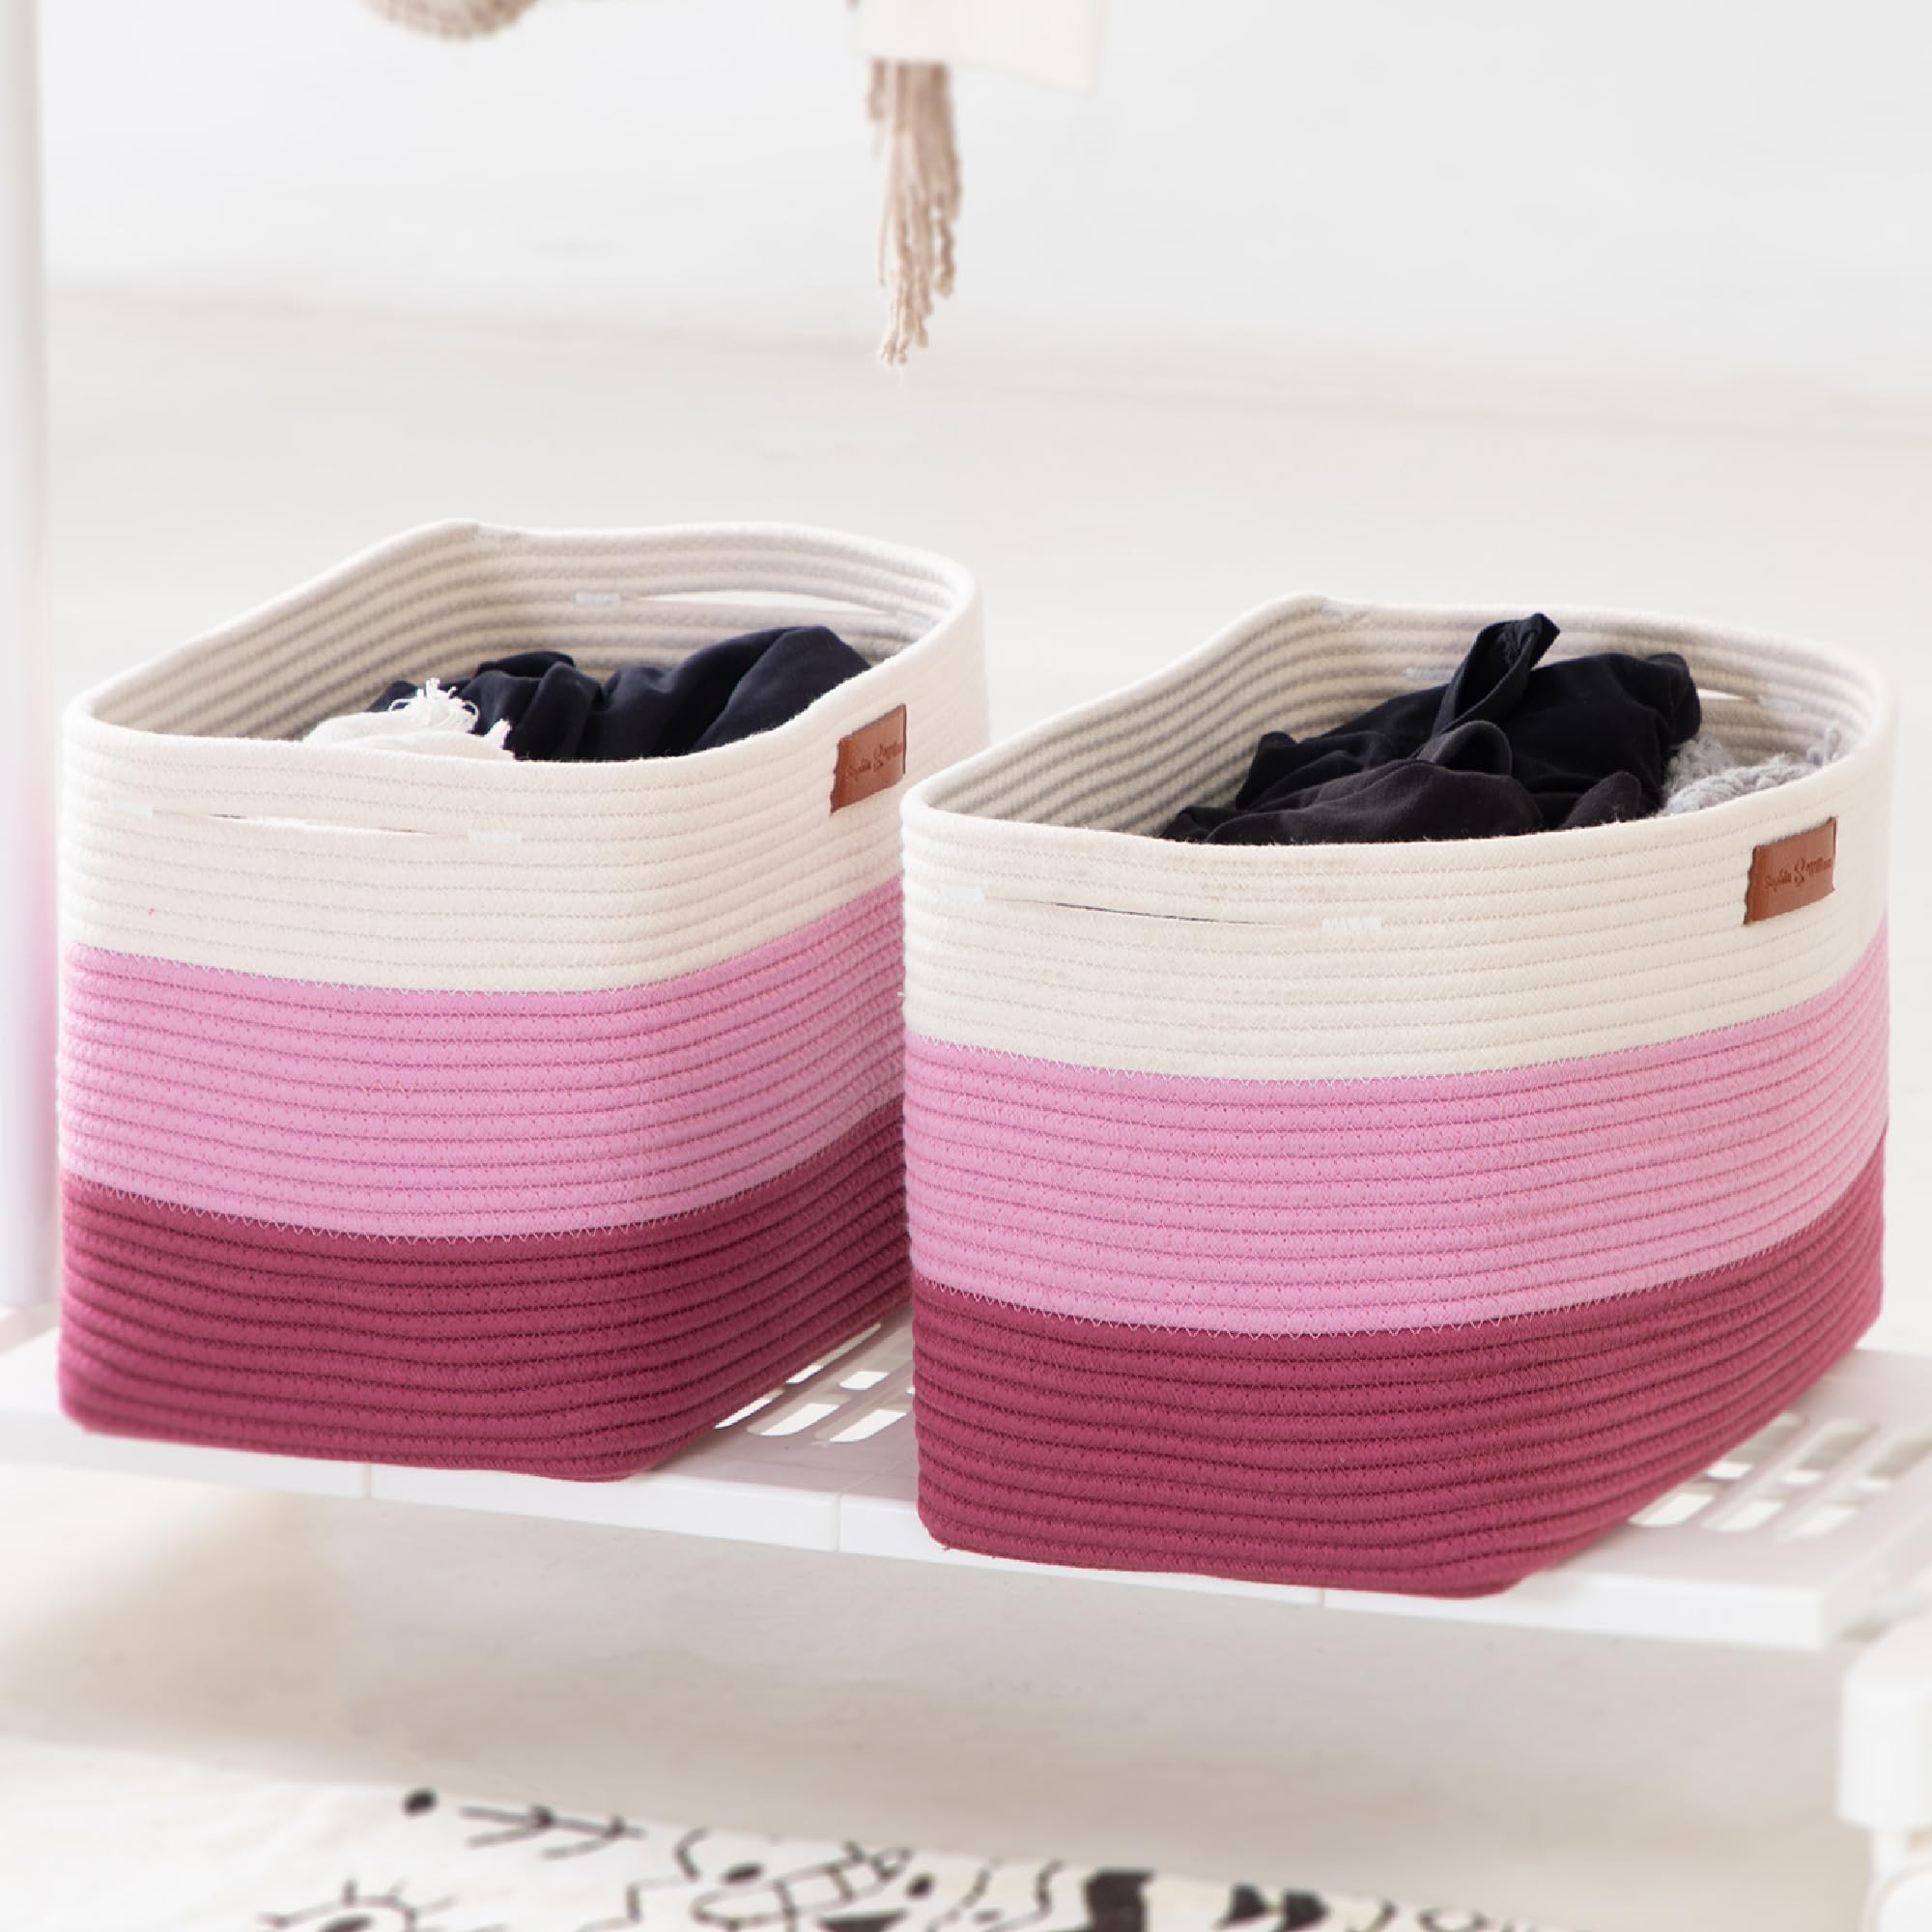 PHI VILLA Large Cotton Rope Basket, Woven Nursery Laundry Blanket Basket Toy Basket with Handles for Storage, Living Room, 15 x 10 x 8 inches, ‎Gradient Pink, 1-Pack